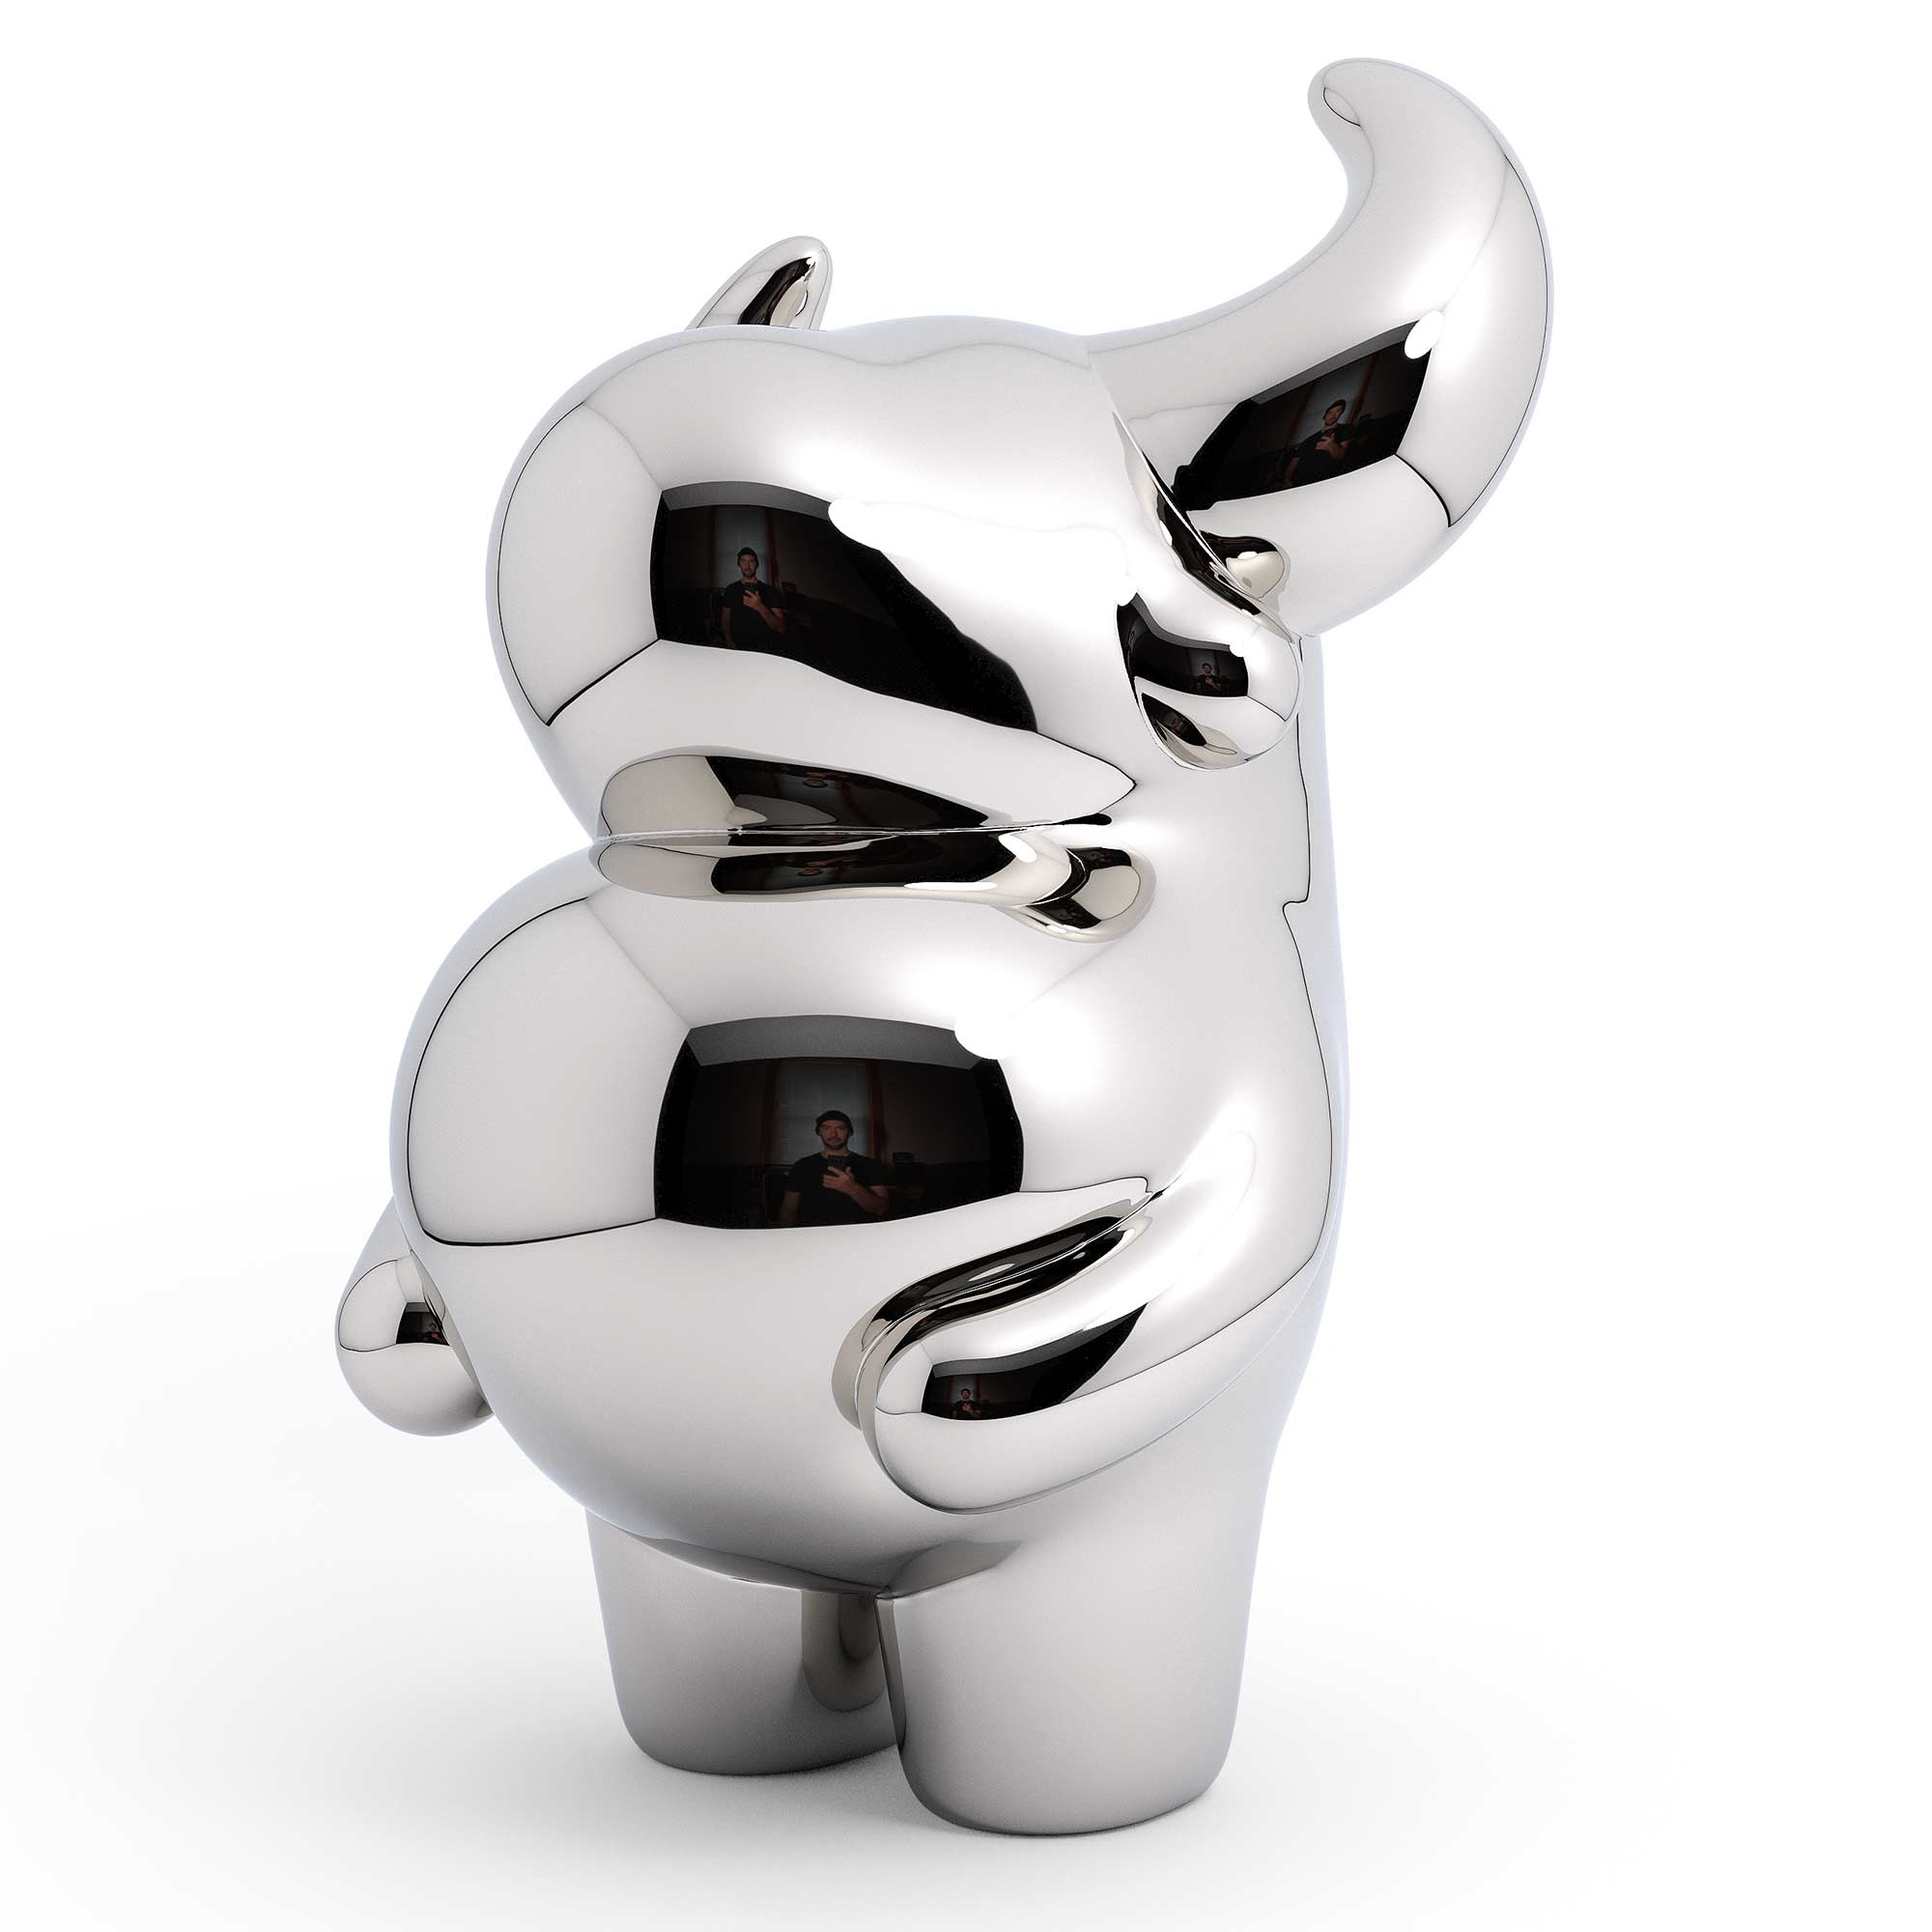 OX “prosperous” bull sculpture, Mirror Polished Stainless Steel Sculpture, by artist Ferdi B Dick, 45 degee angle view